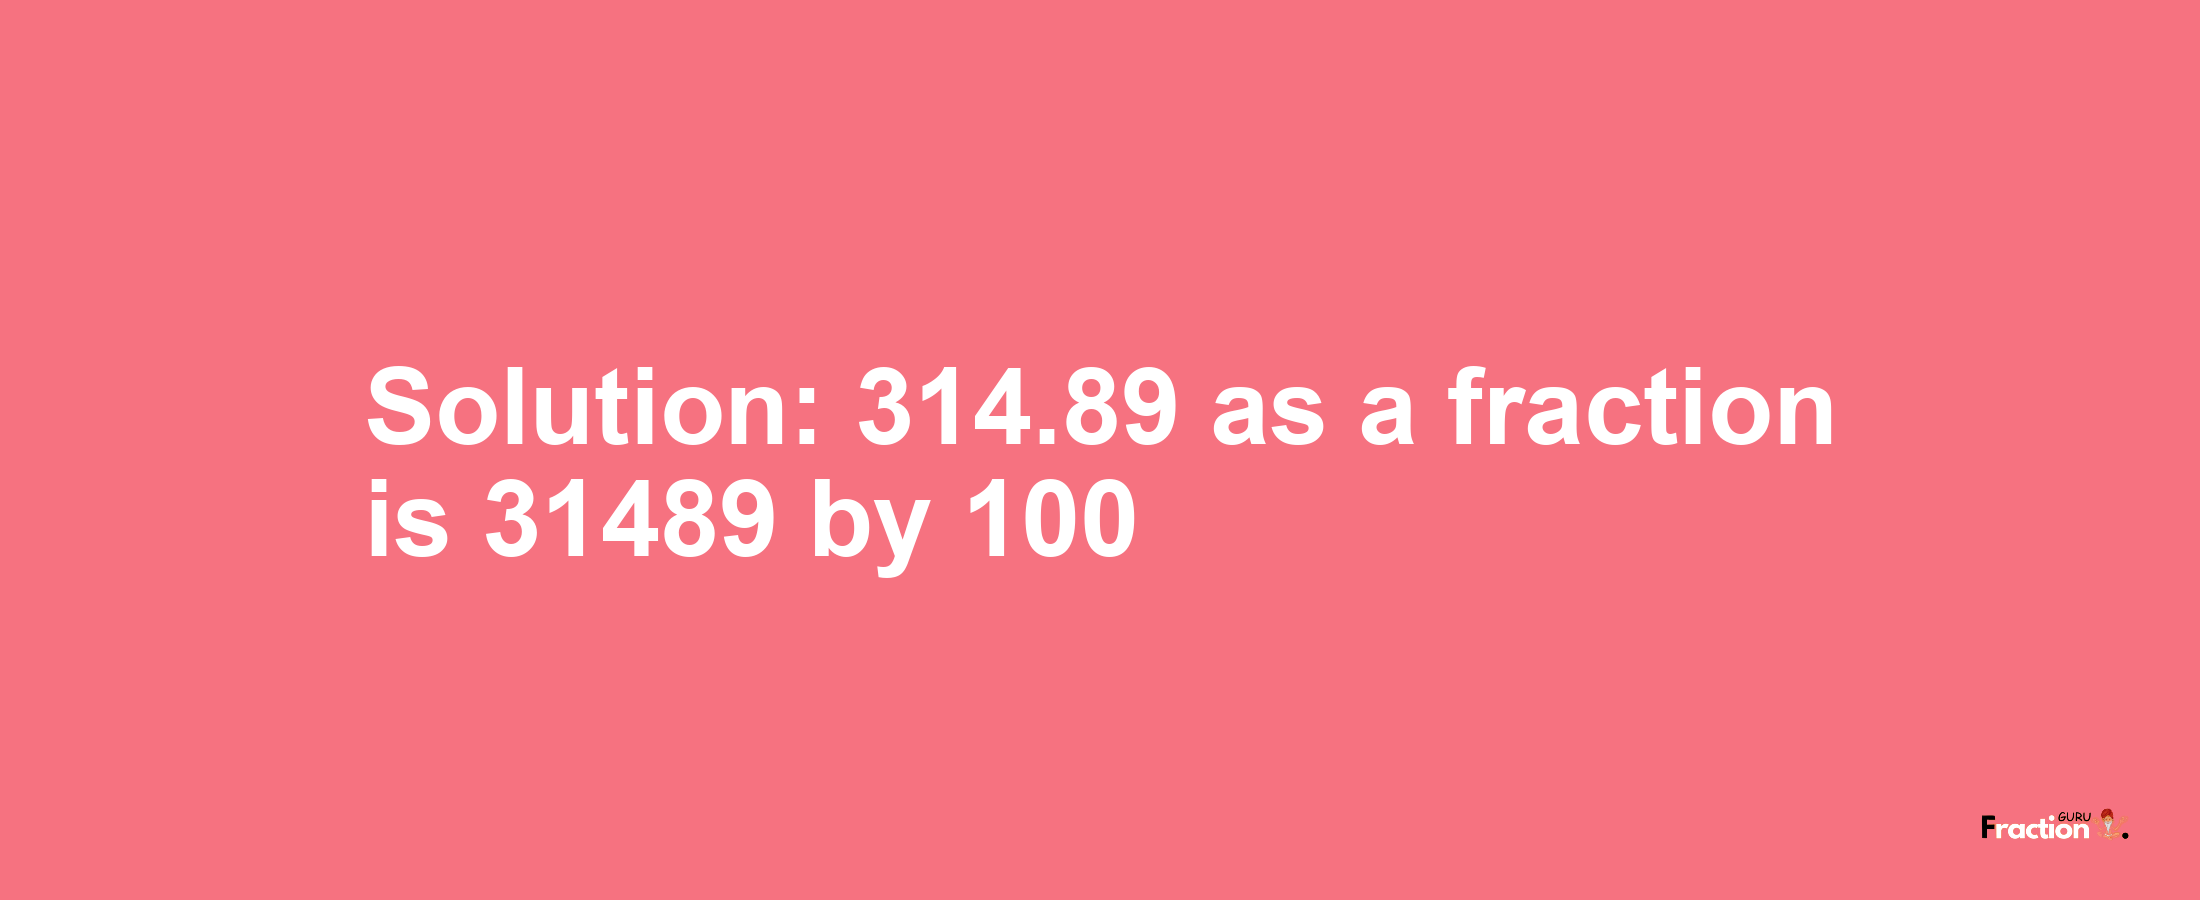 Solution:314.89 as a fraction is 31489/100